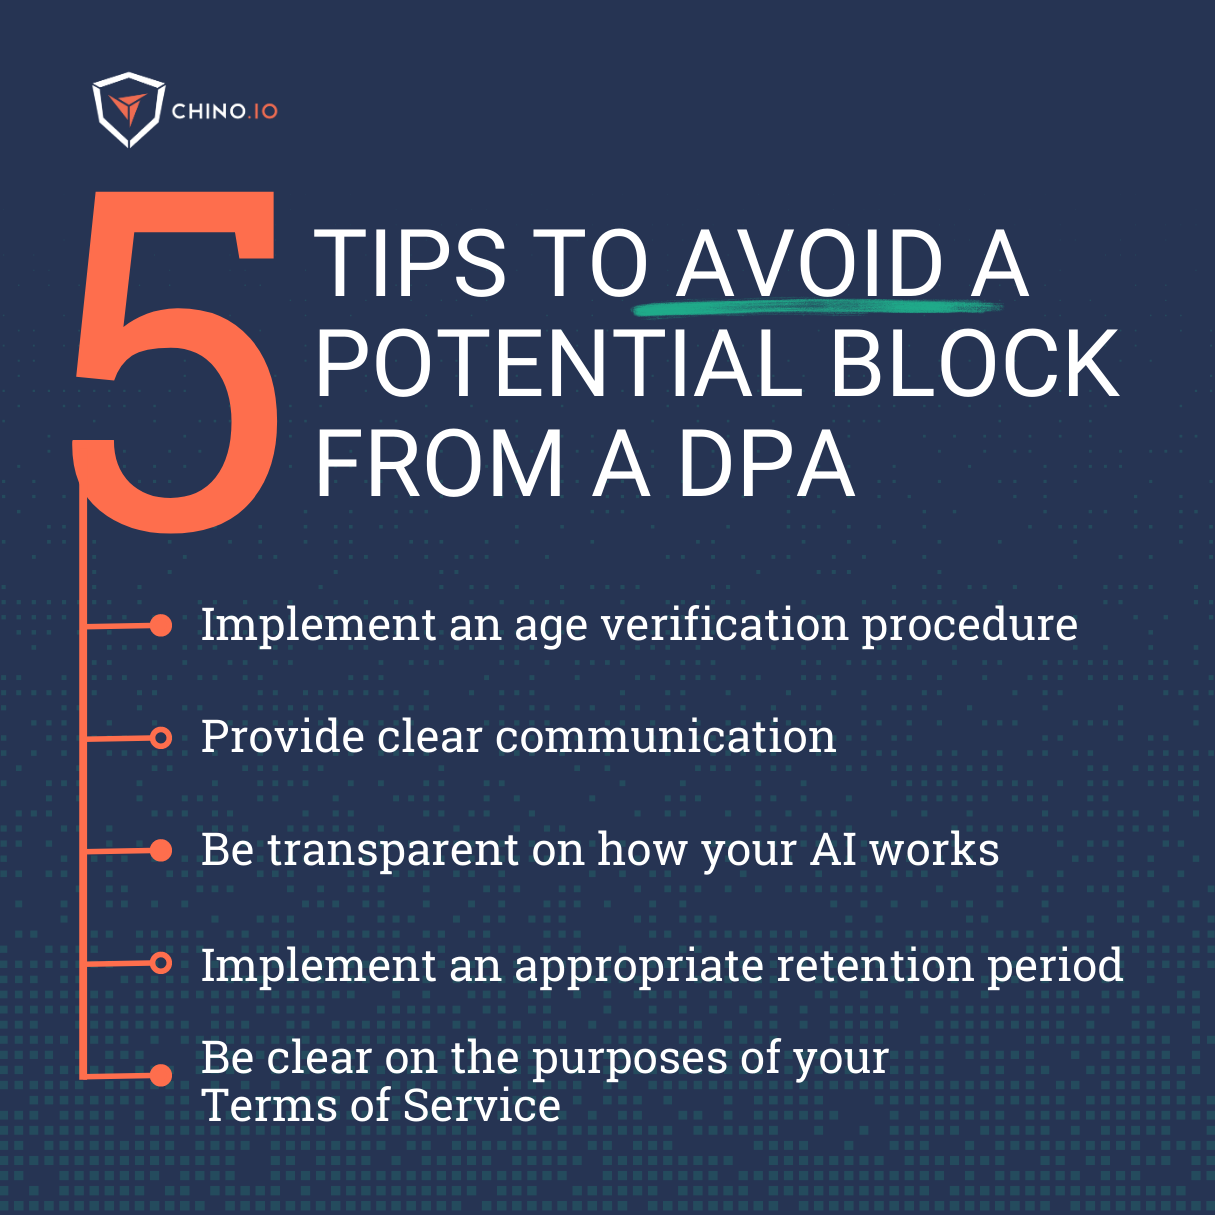 Image on a blue background that says "5 tips to avoid a potential block from a DPA"